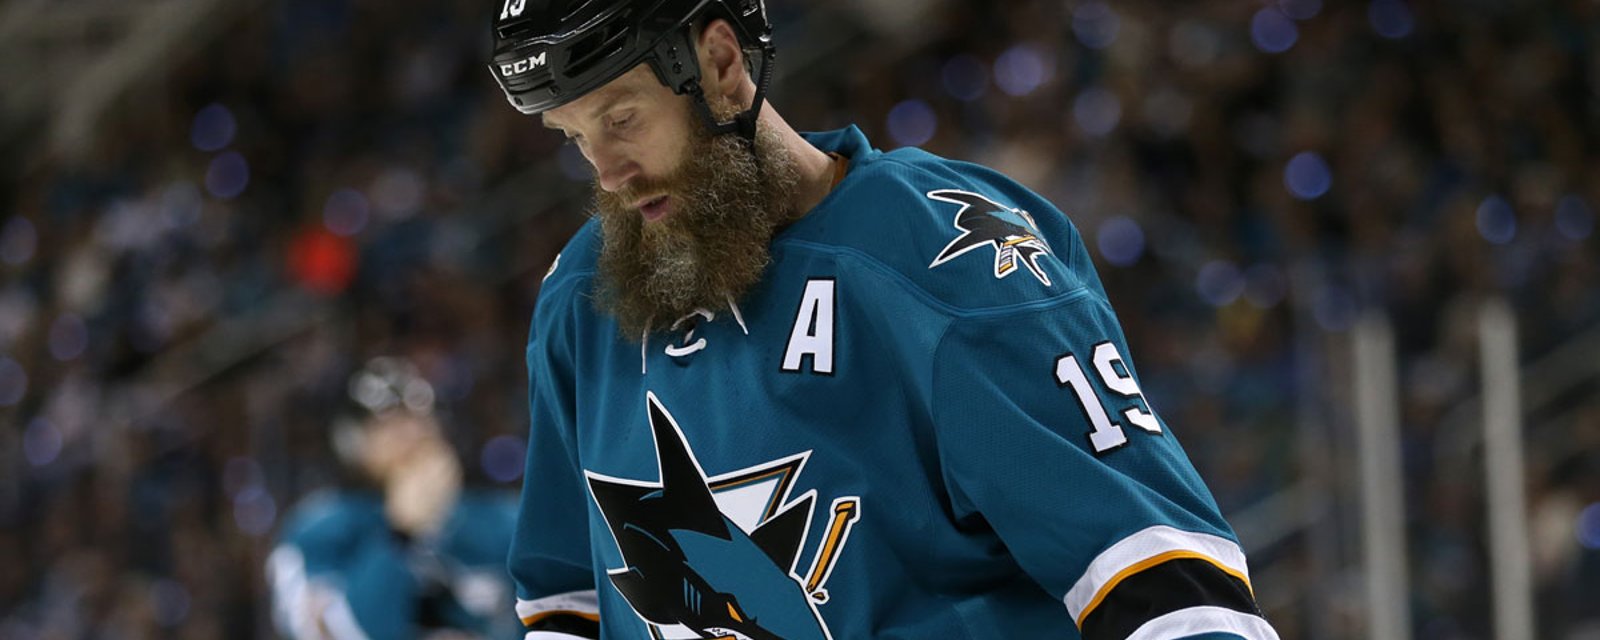 Report: Sharks accused of lying about Thornton's health 